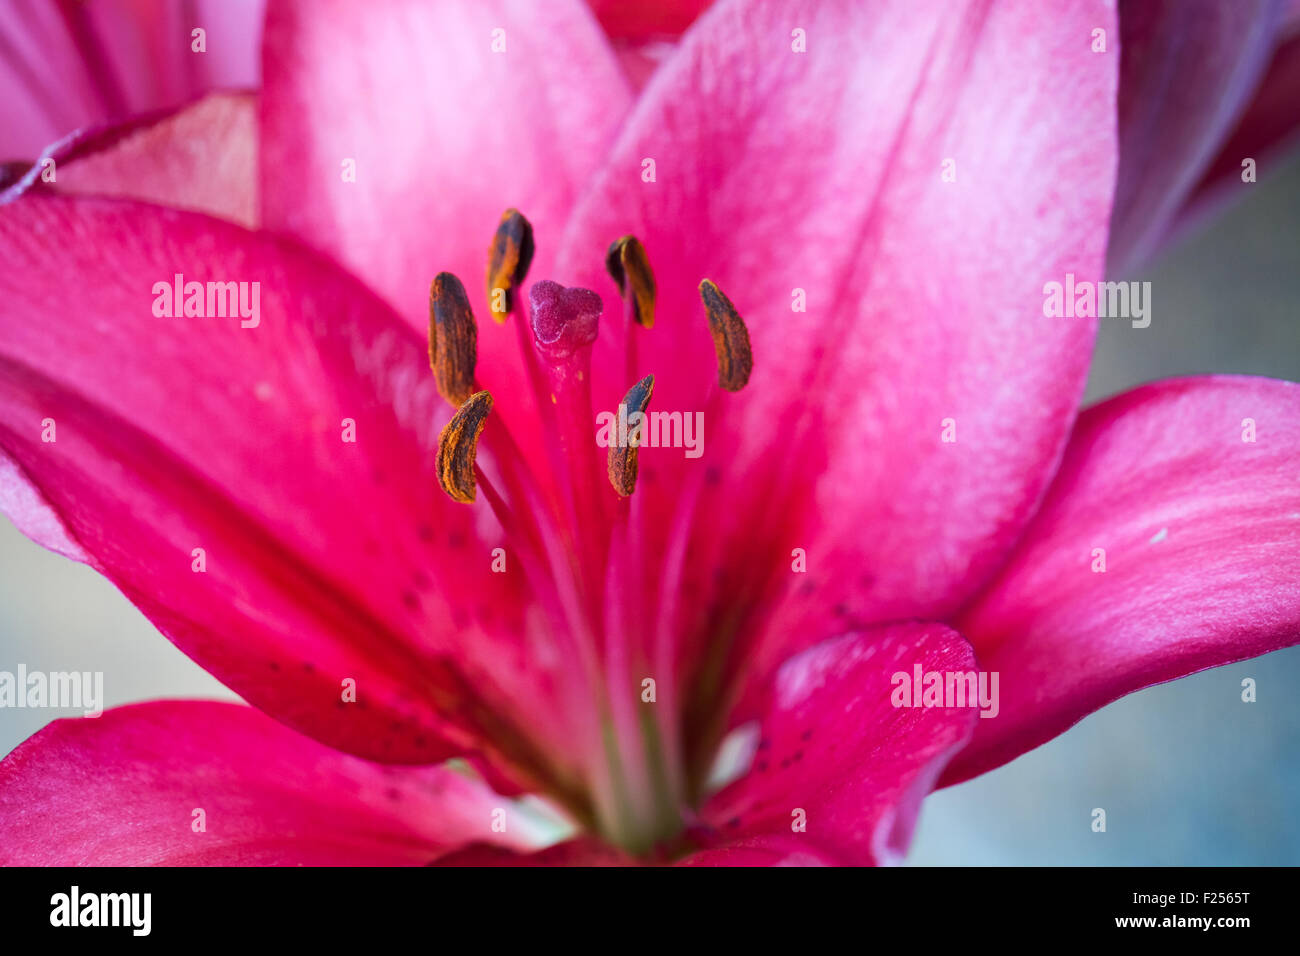 Bright pink lily flower fragment, macro photo with selective focus Stock Photo